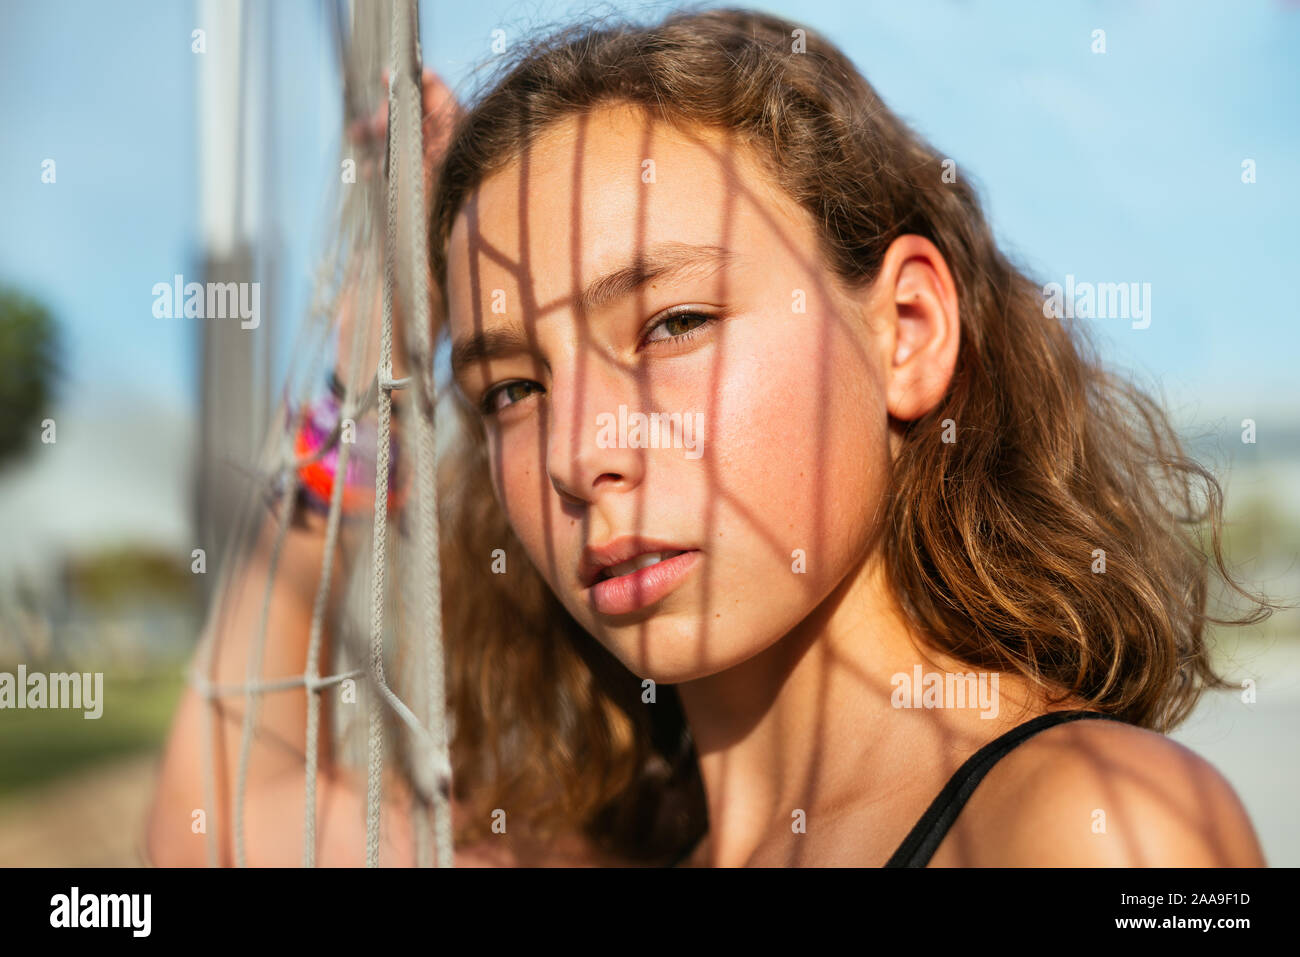 Portrait of teenage girl at park Stock Photo